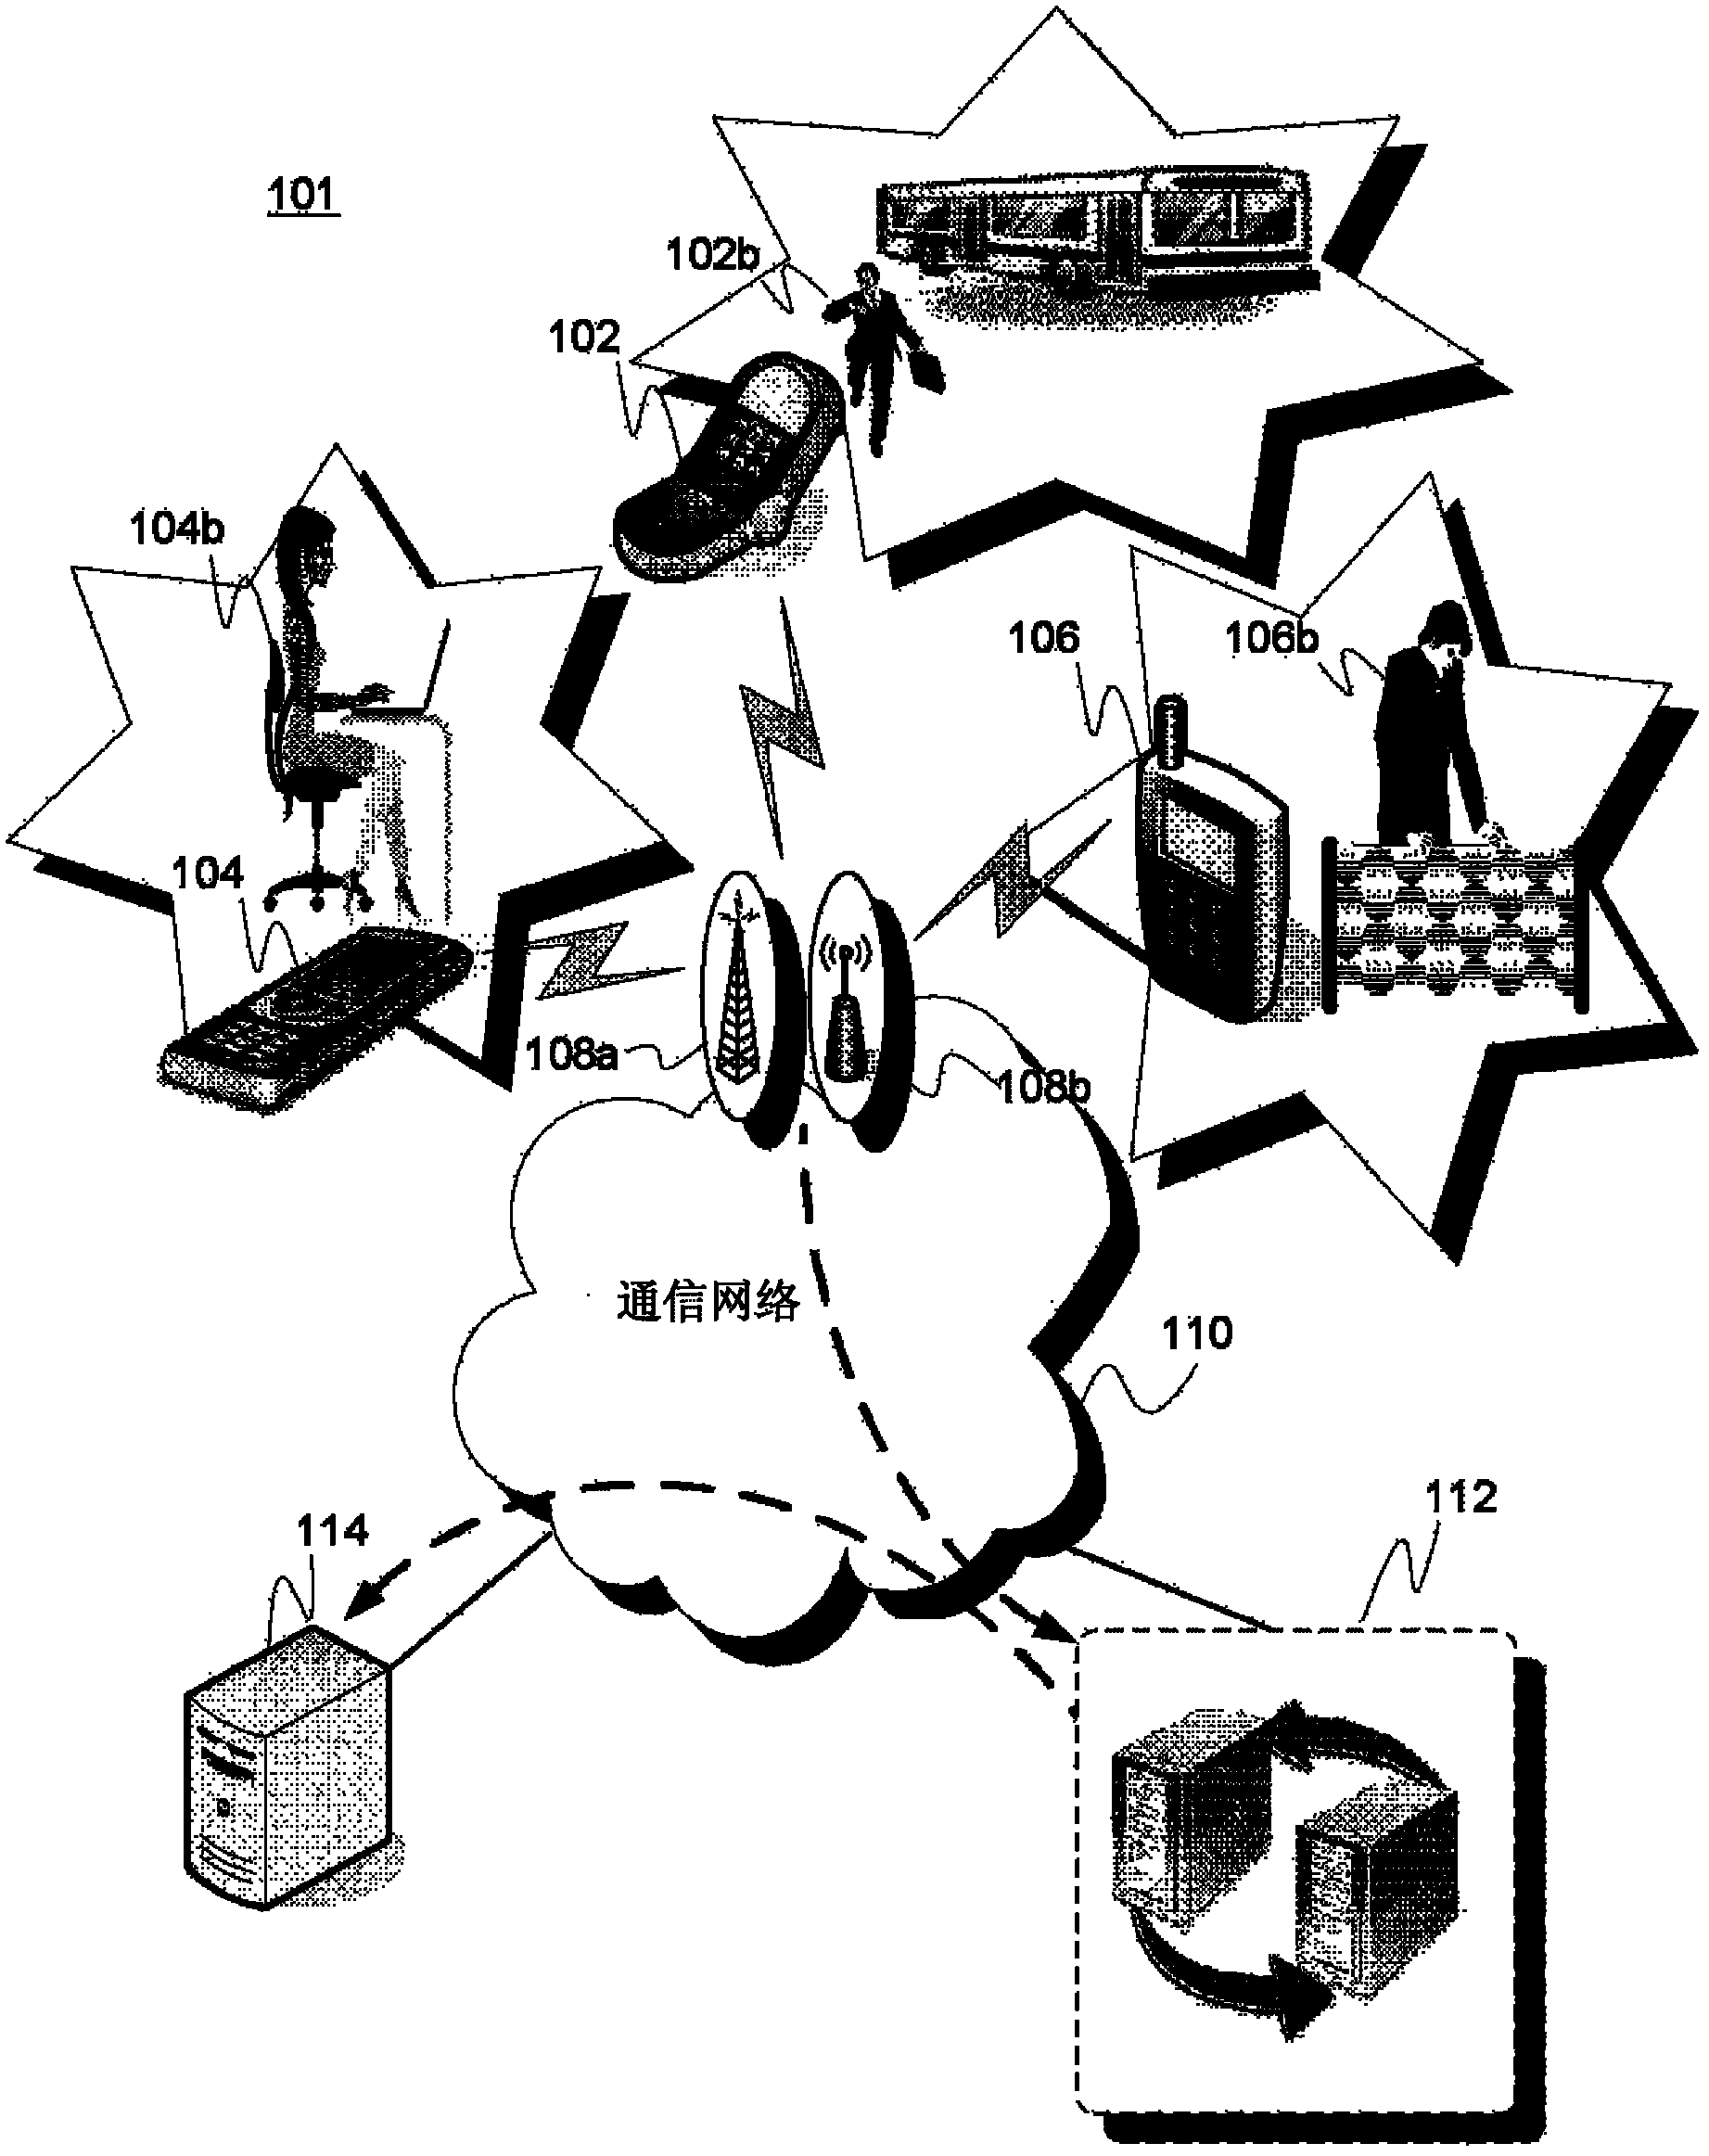 Mobile terminal and method for providing life observations and a related server arrangement and method with data analysis, distribution and terminal guiding features